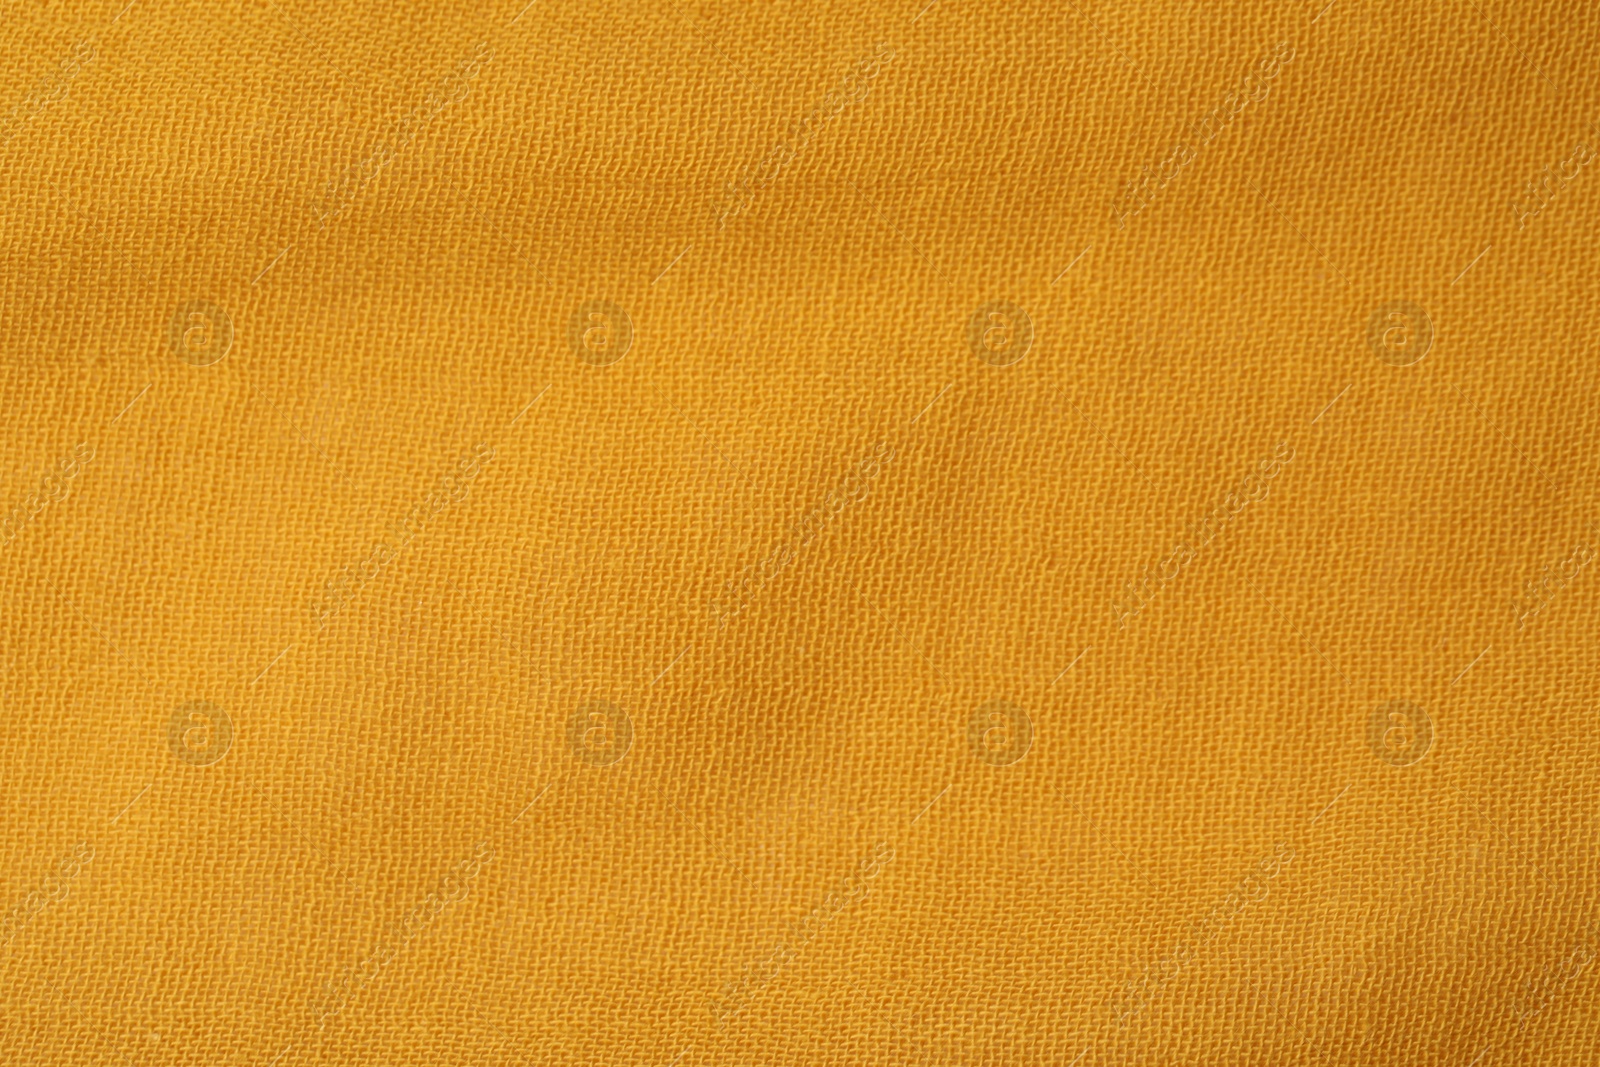 Photo of Texture of bright orange fabric as background, top view